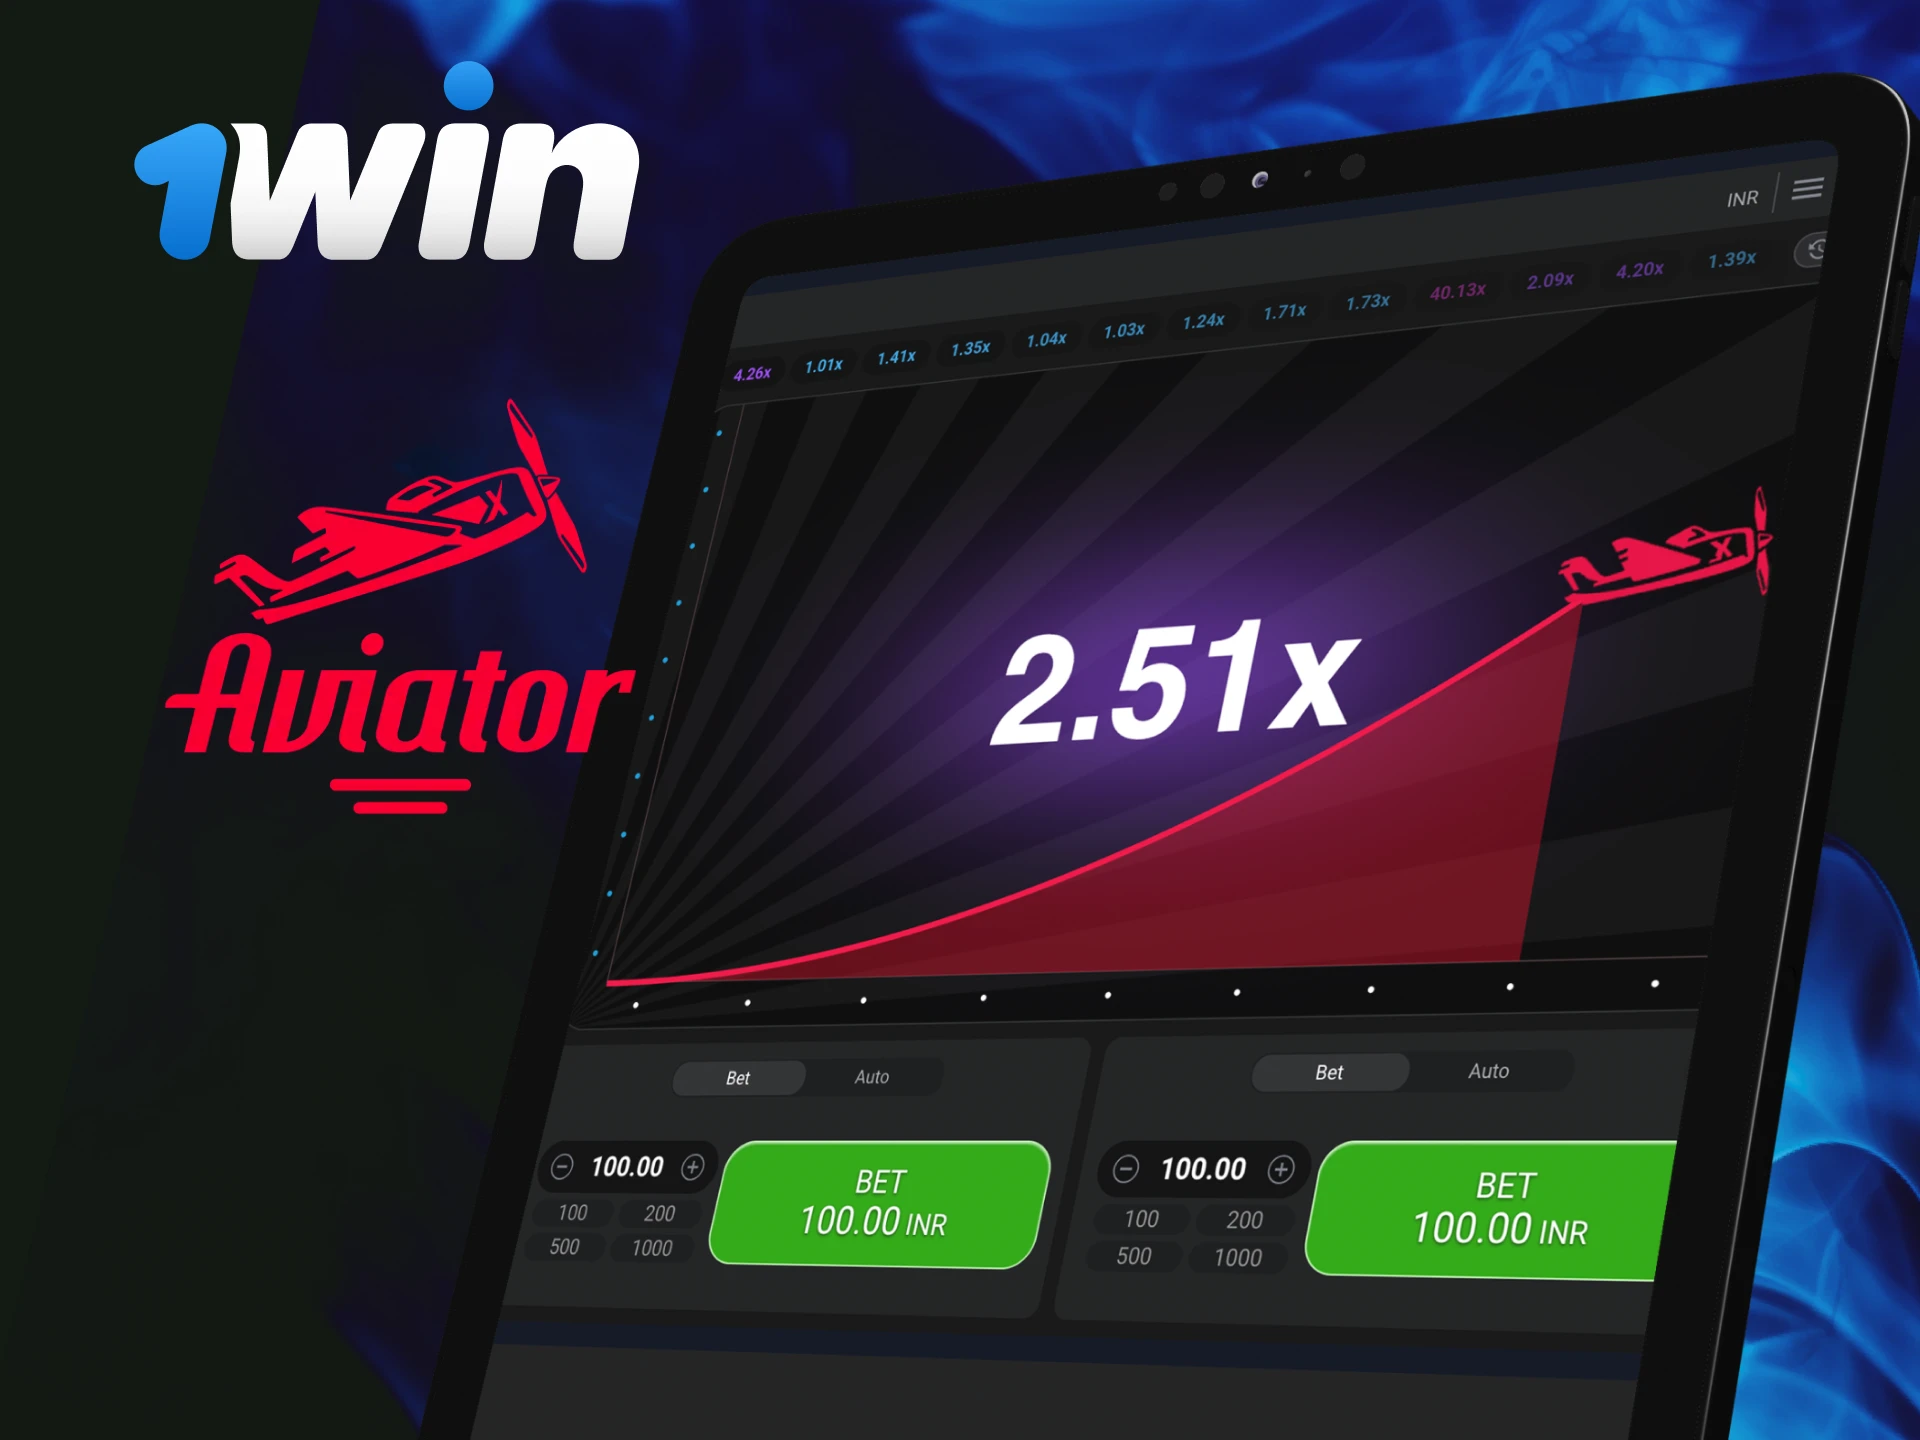 If you are a beginner, you should try to play the demo mode of the Aviator game at 1Win casino.